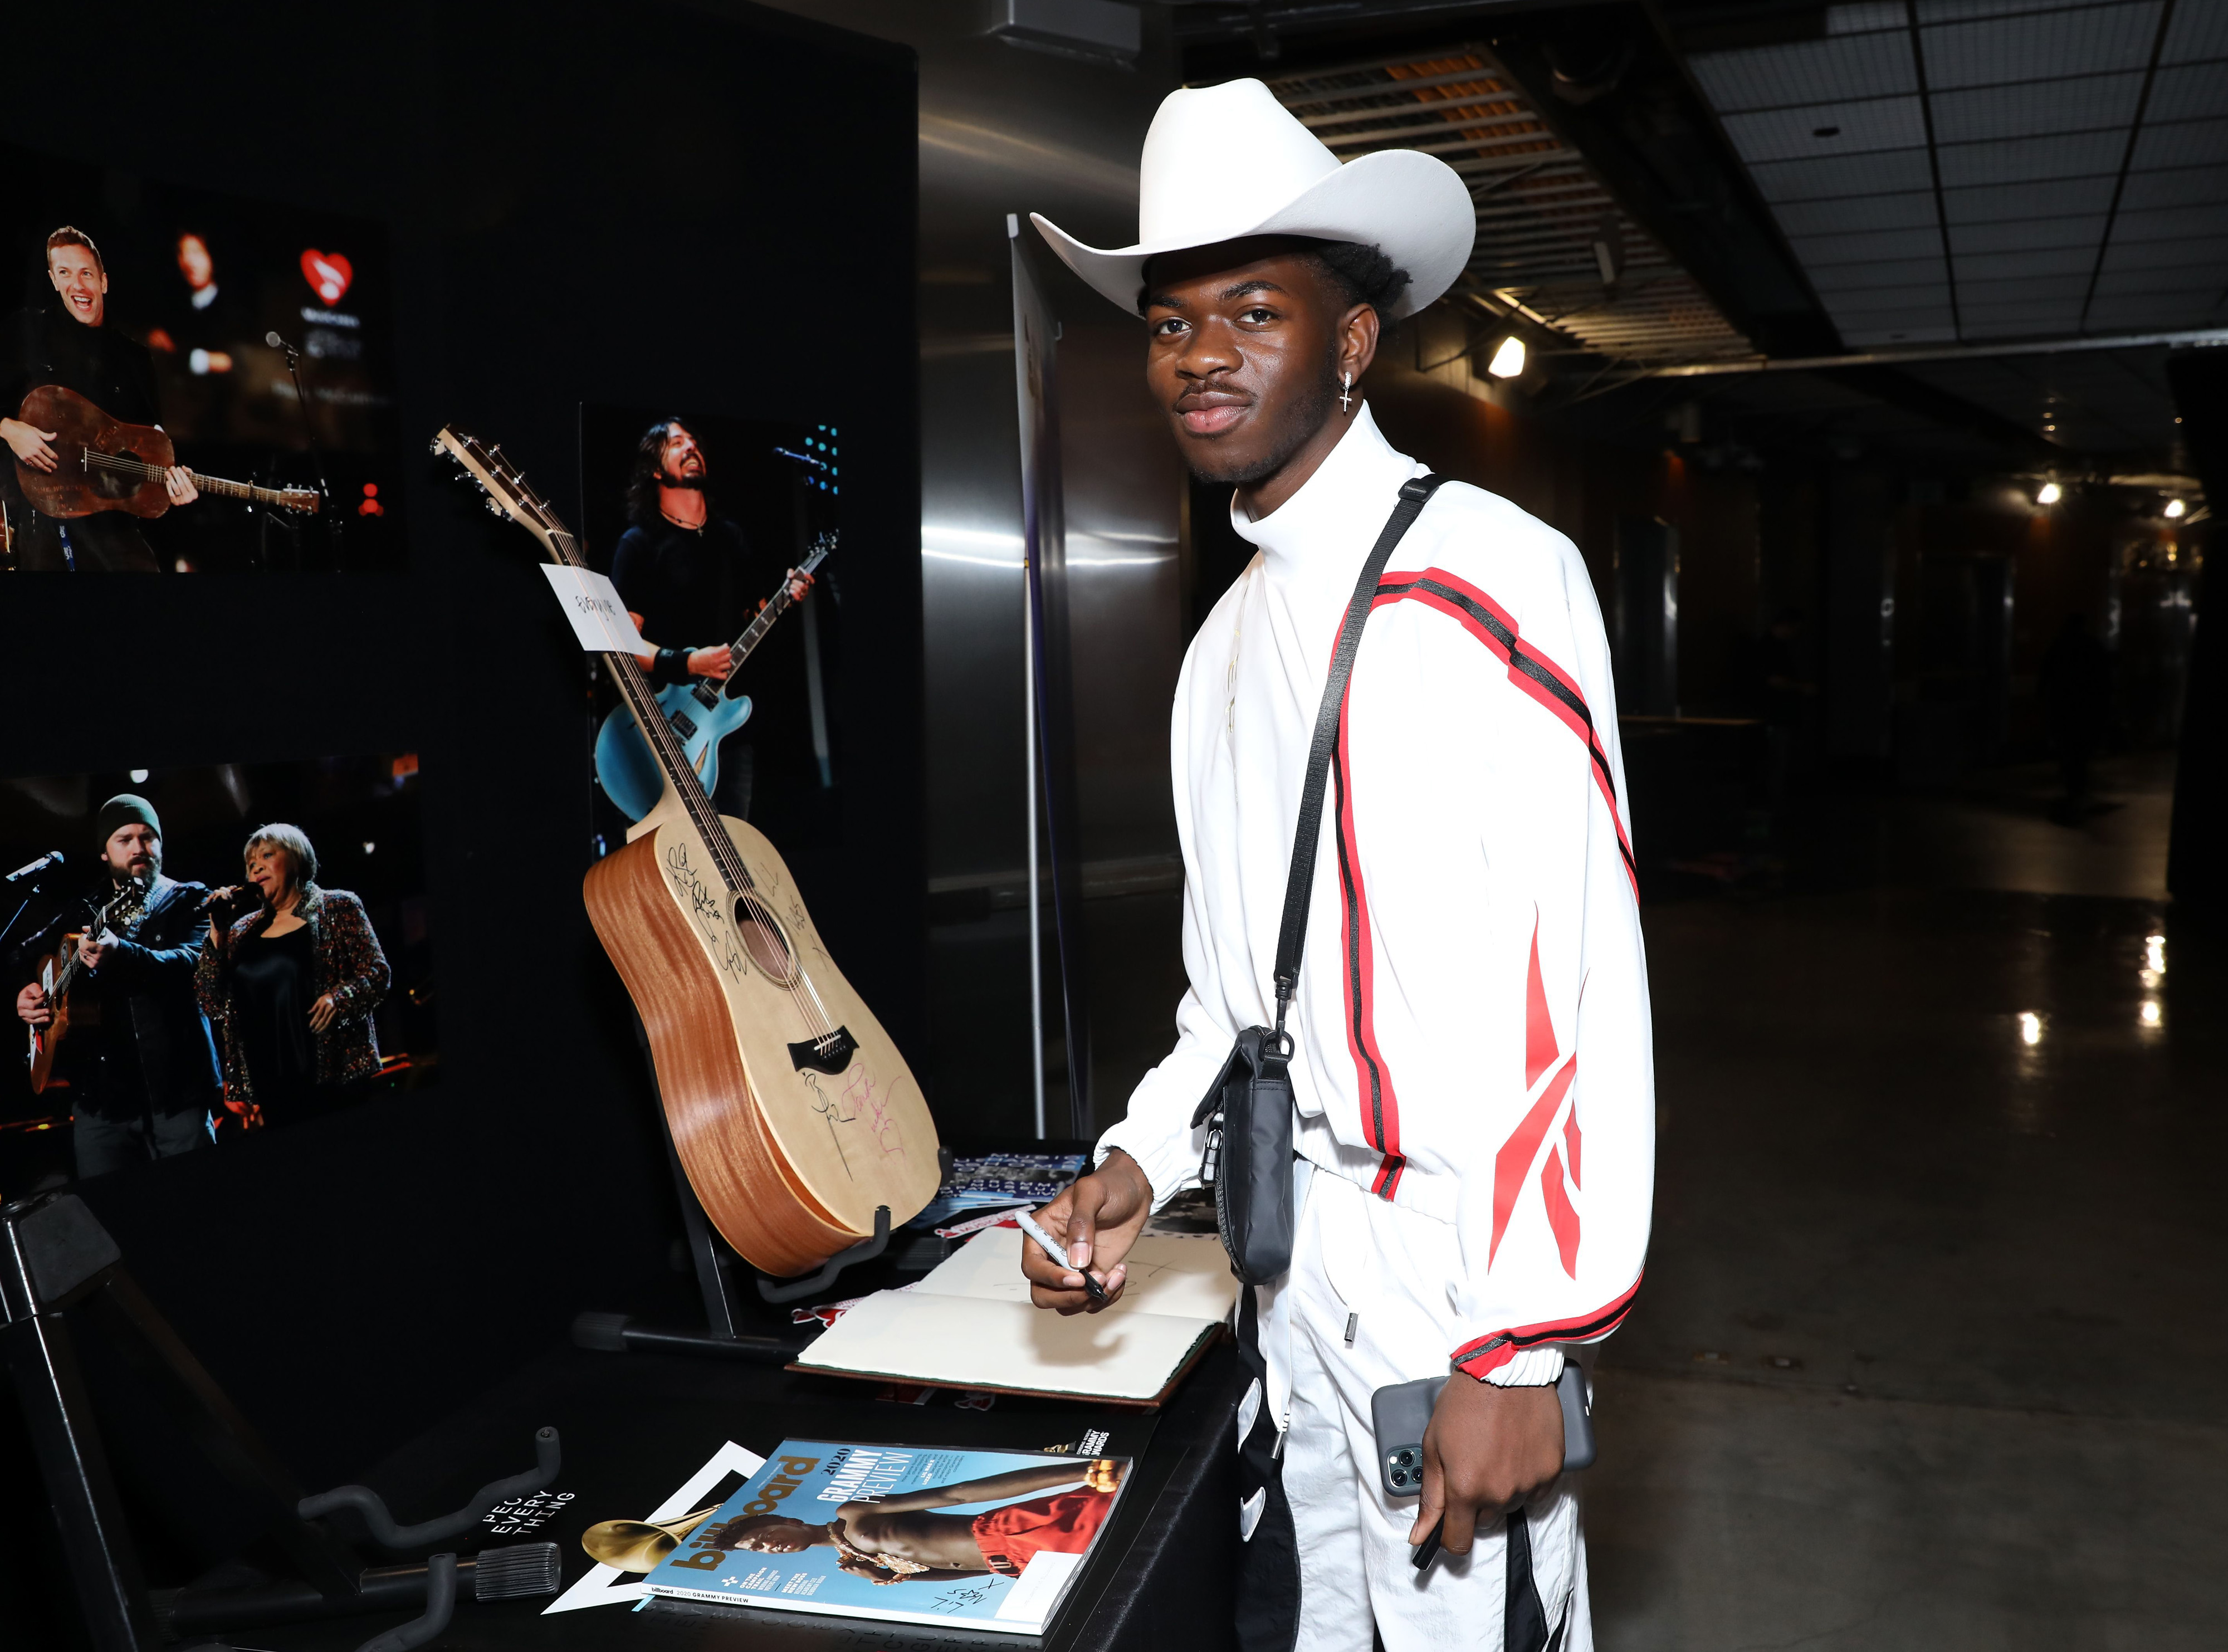 Lil Nas X Stars In New Doritos Super Bowl Commercial: Watch